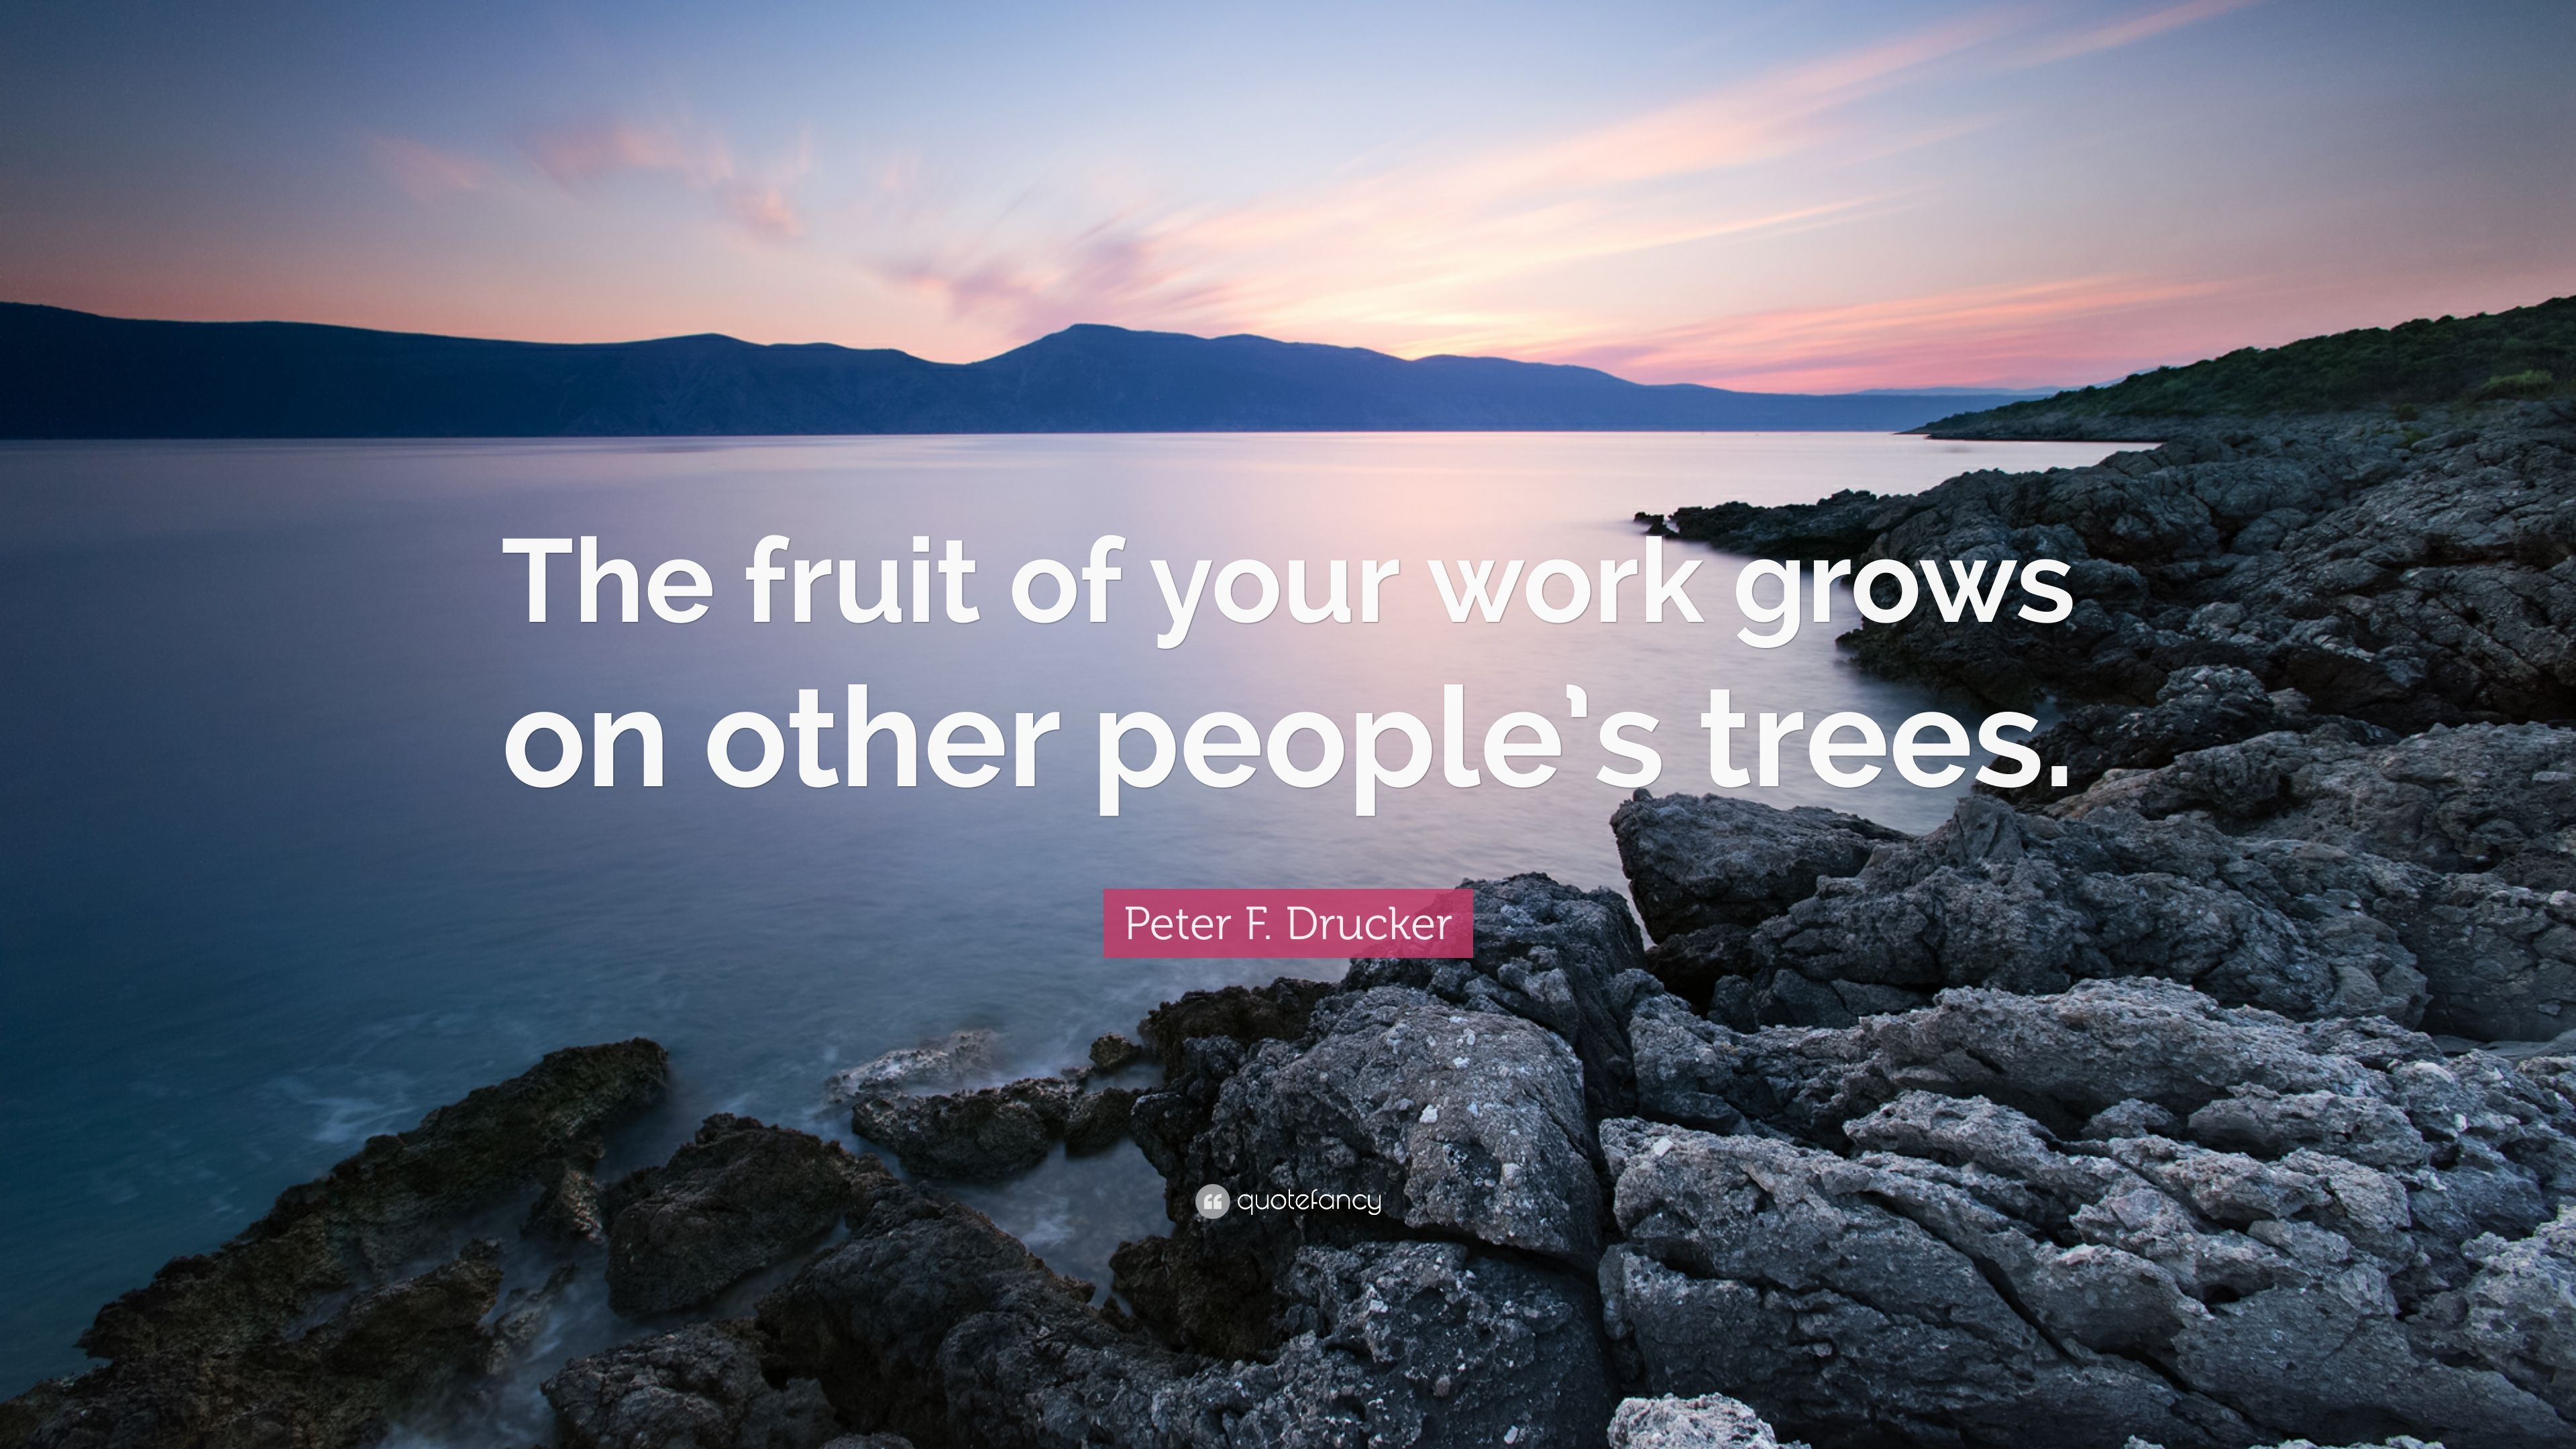 Peter F. Drucker Quote: “The fruit of your work grows on other people's trees.” (7 wallpaper)